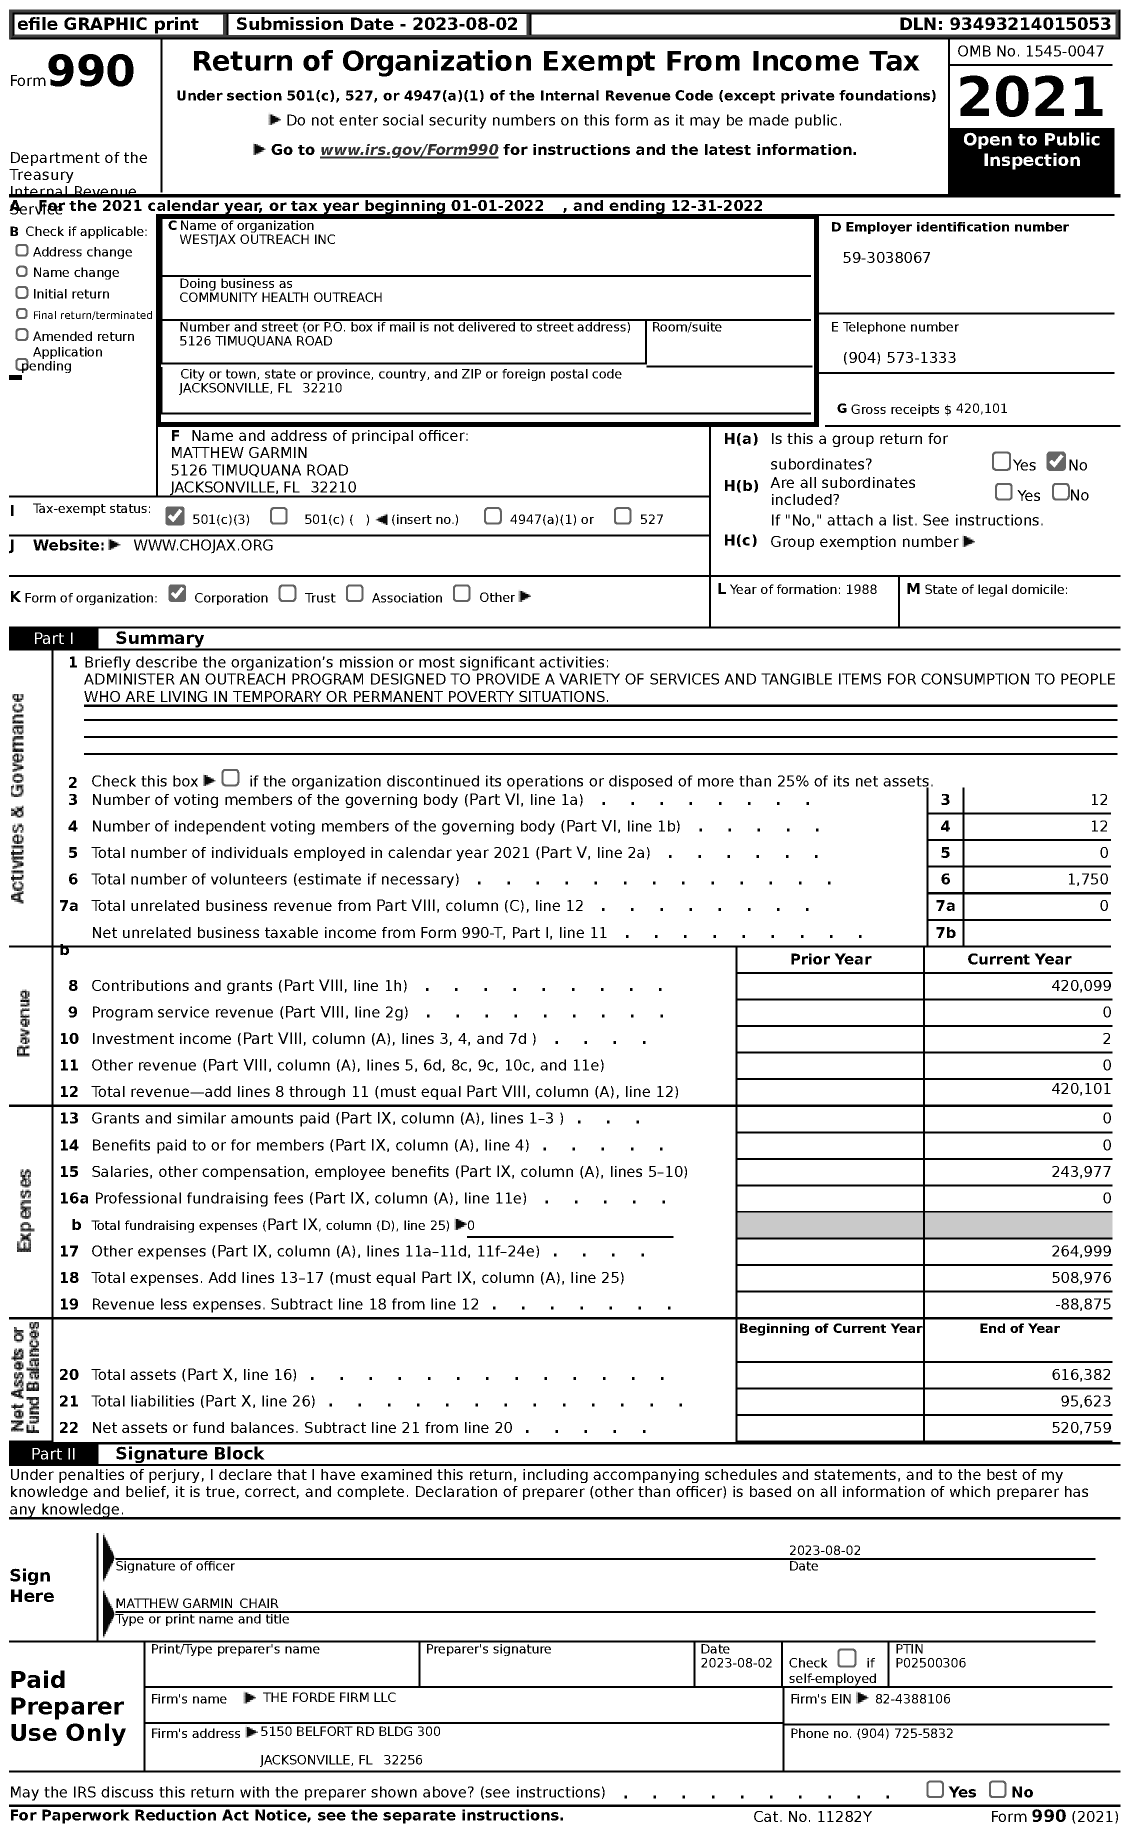 Image of first page of 2022 Form 990 for Community Health Outreach / Westjax Outreach Inc